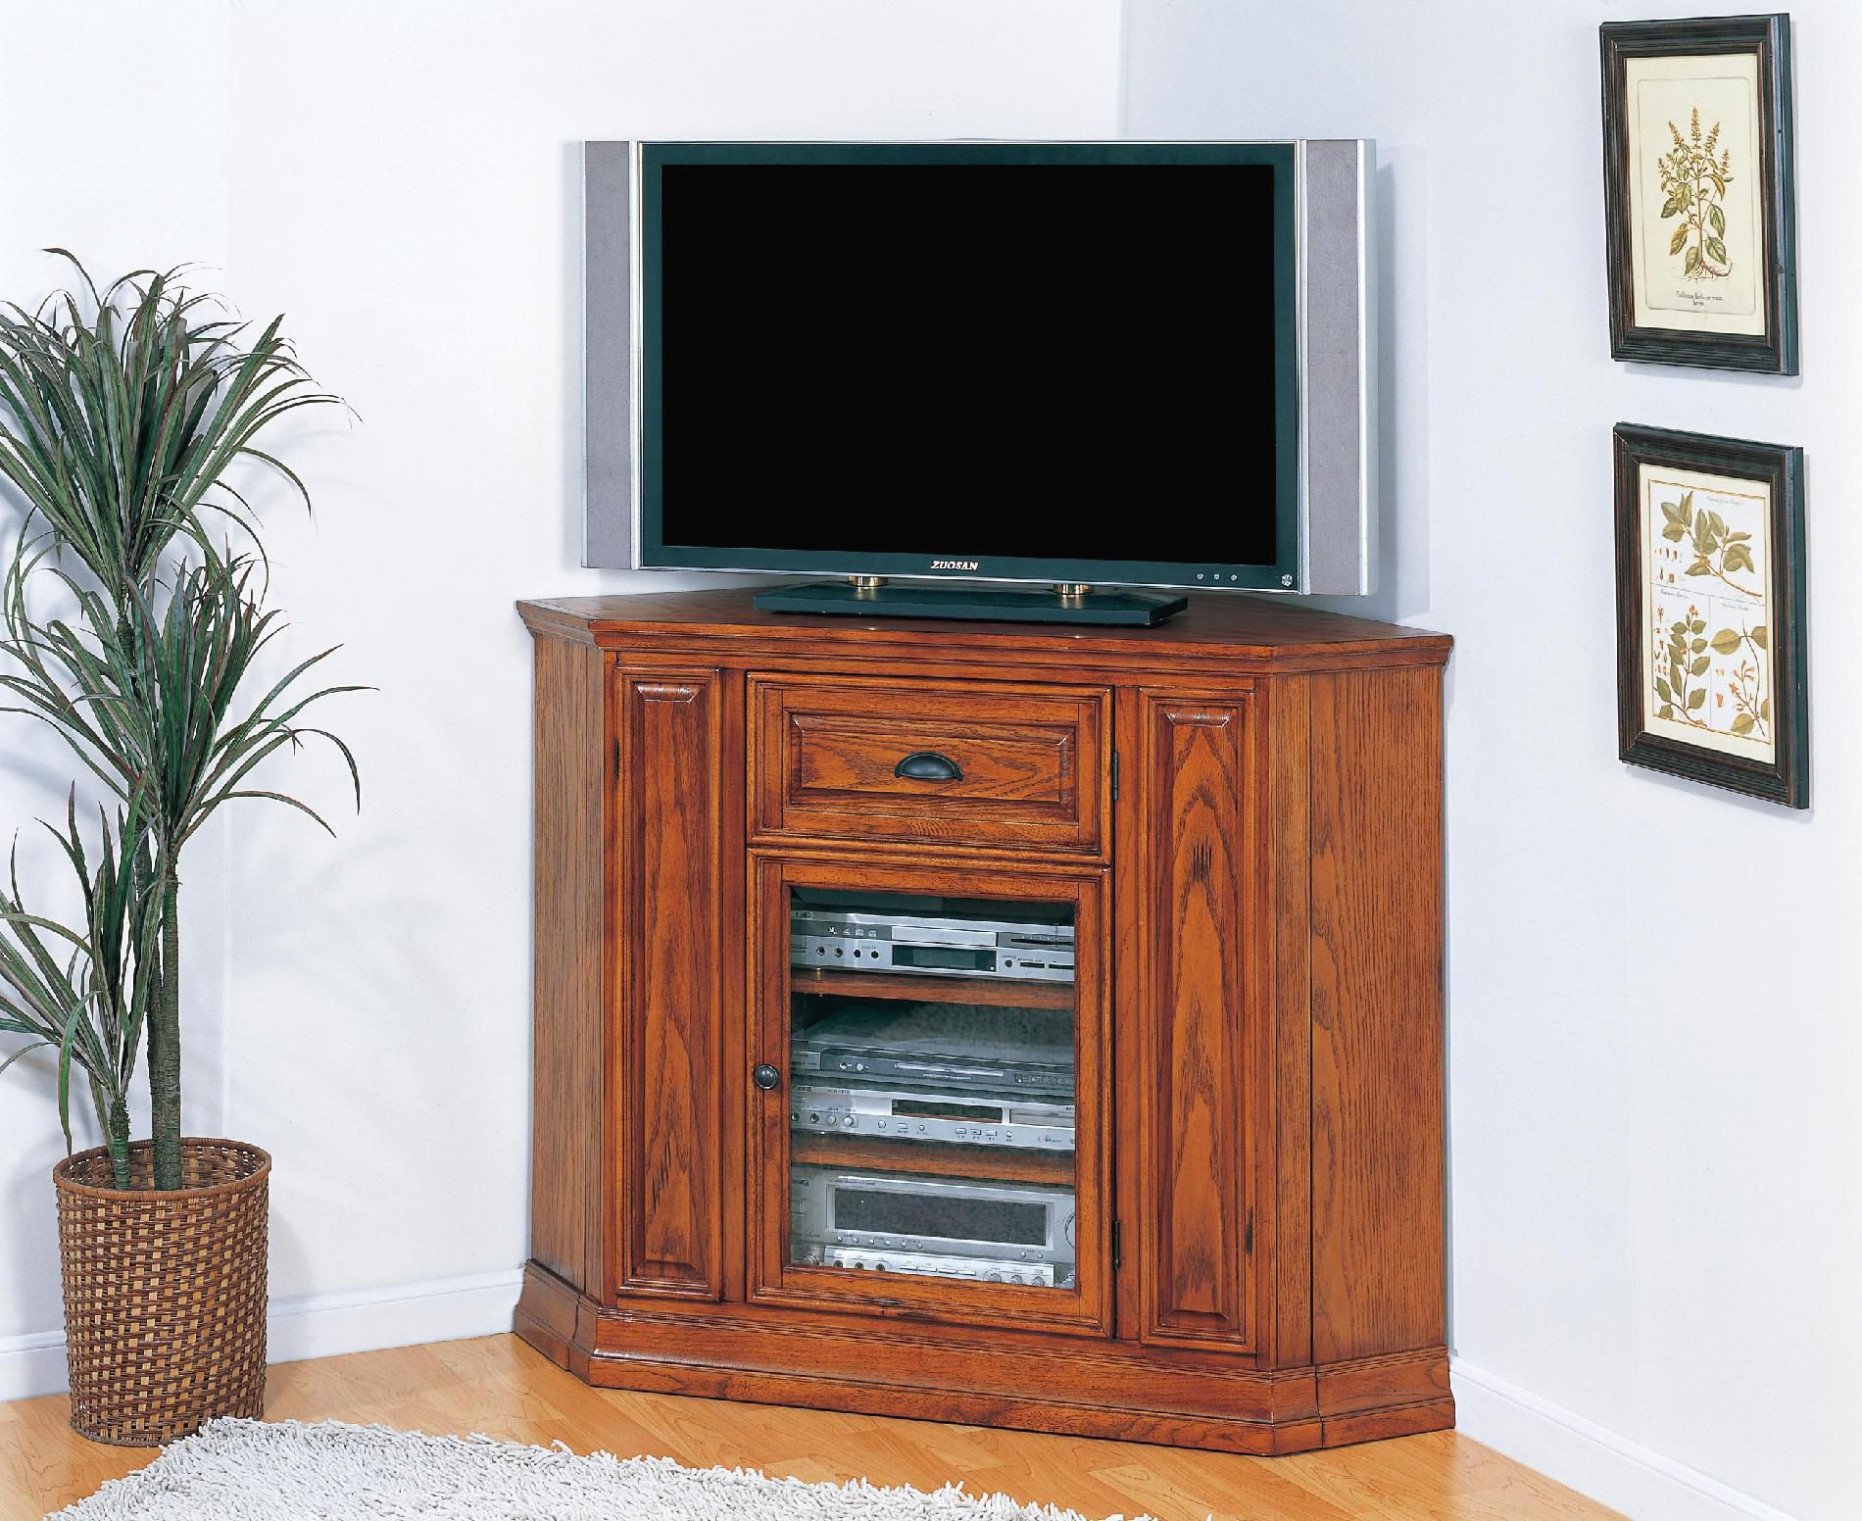 20 New Tall Tv Stands For Bedroom